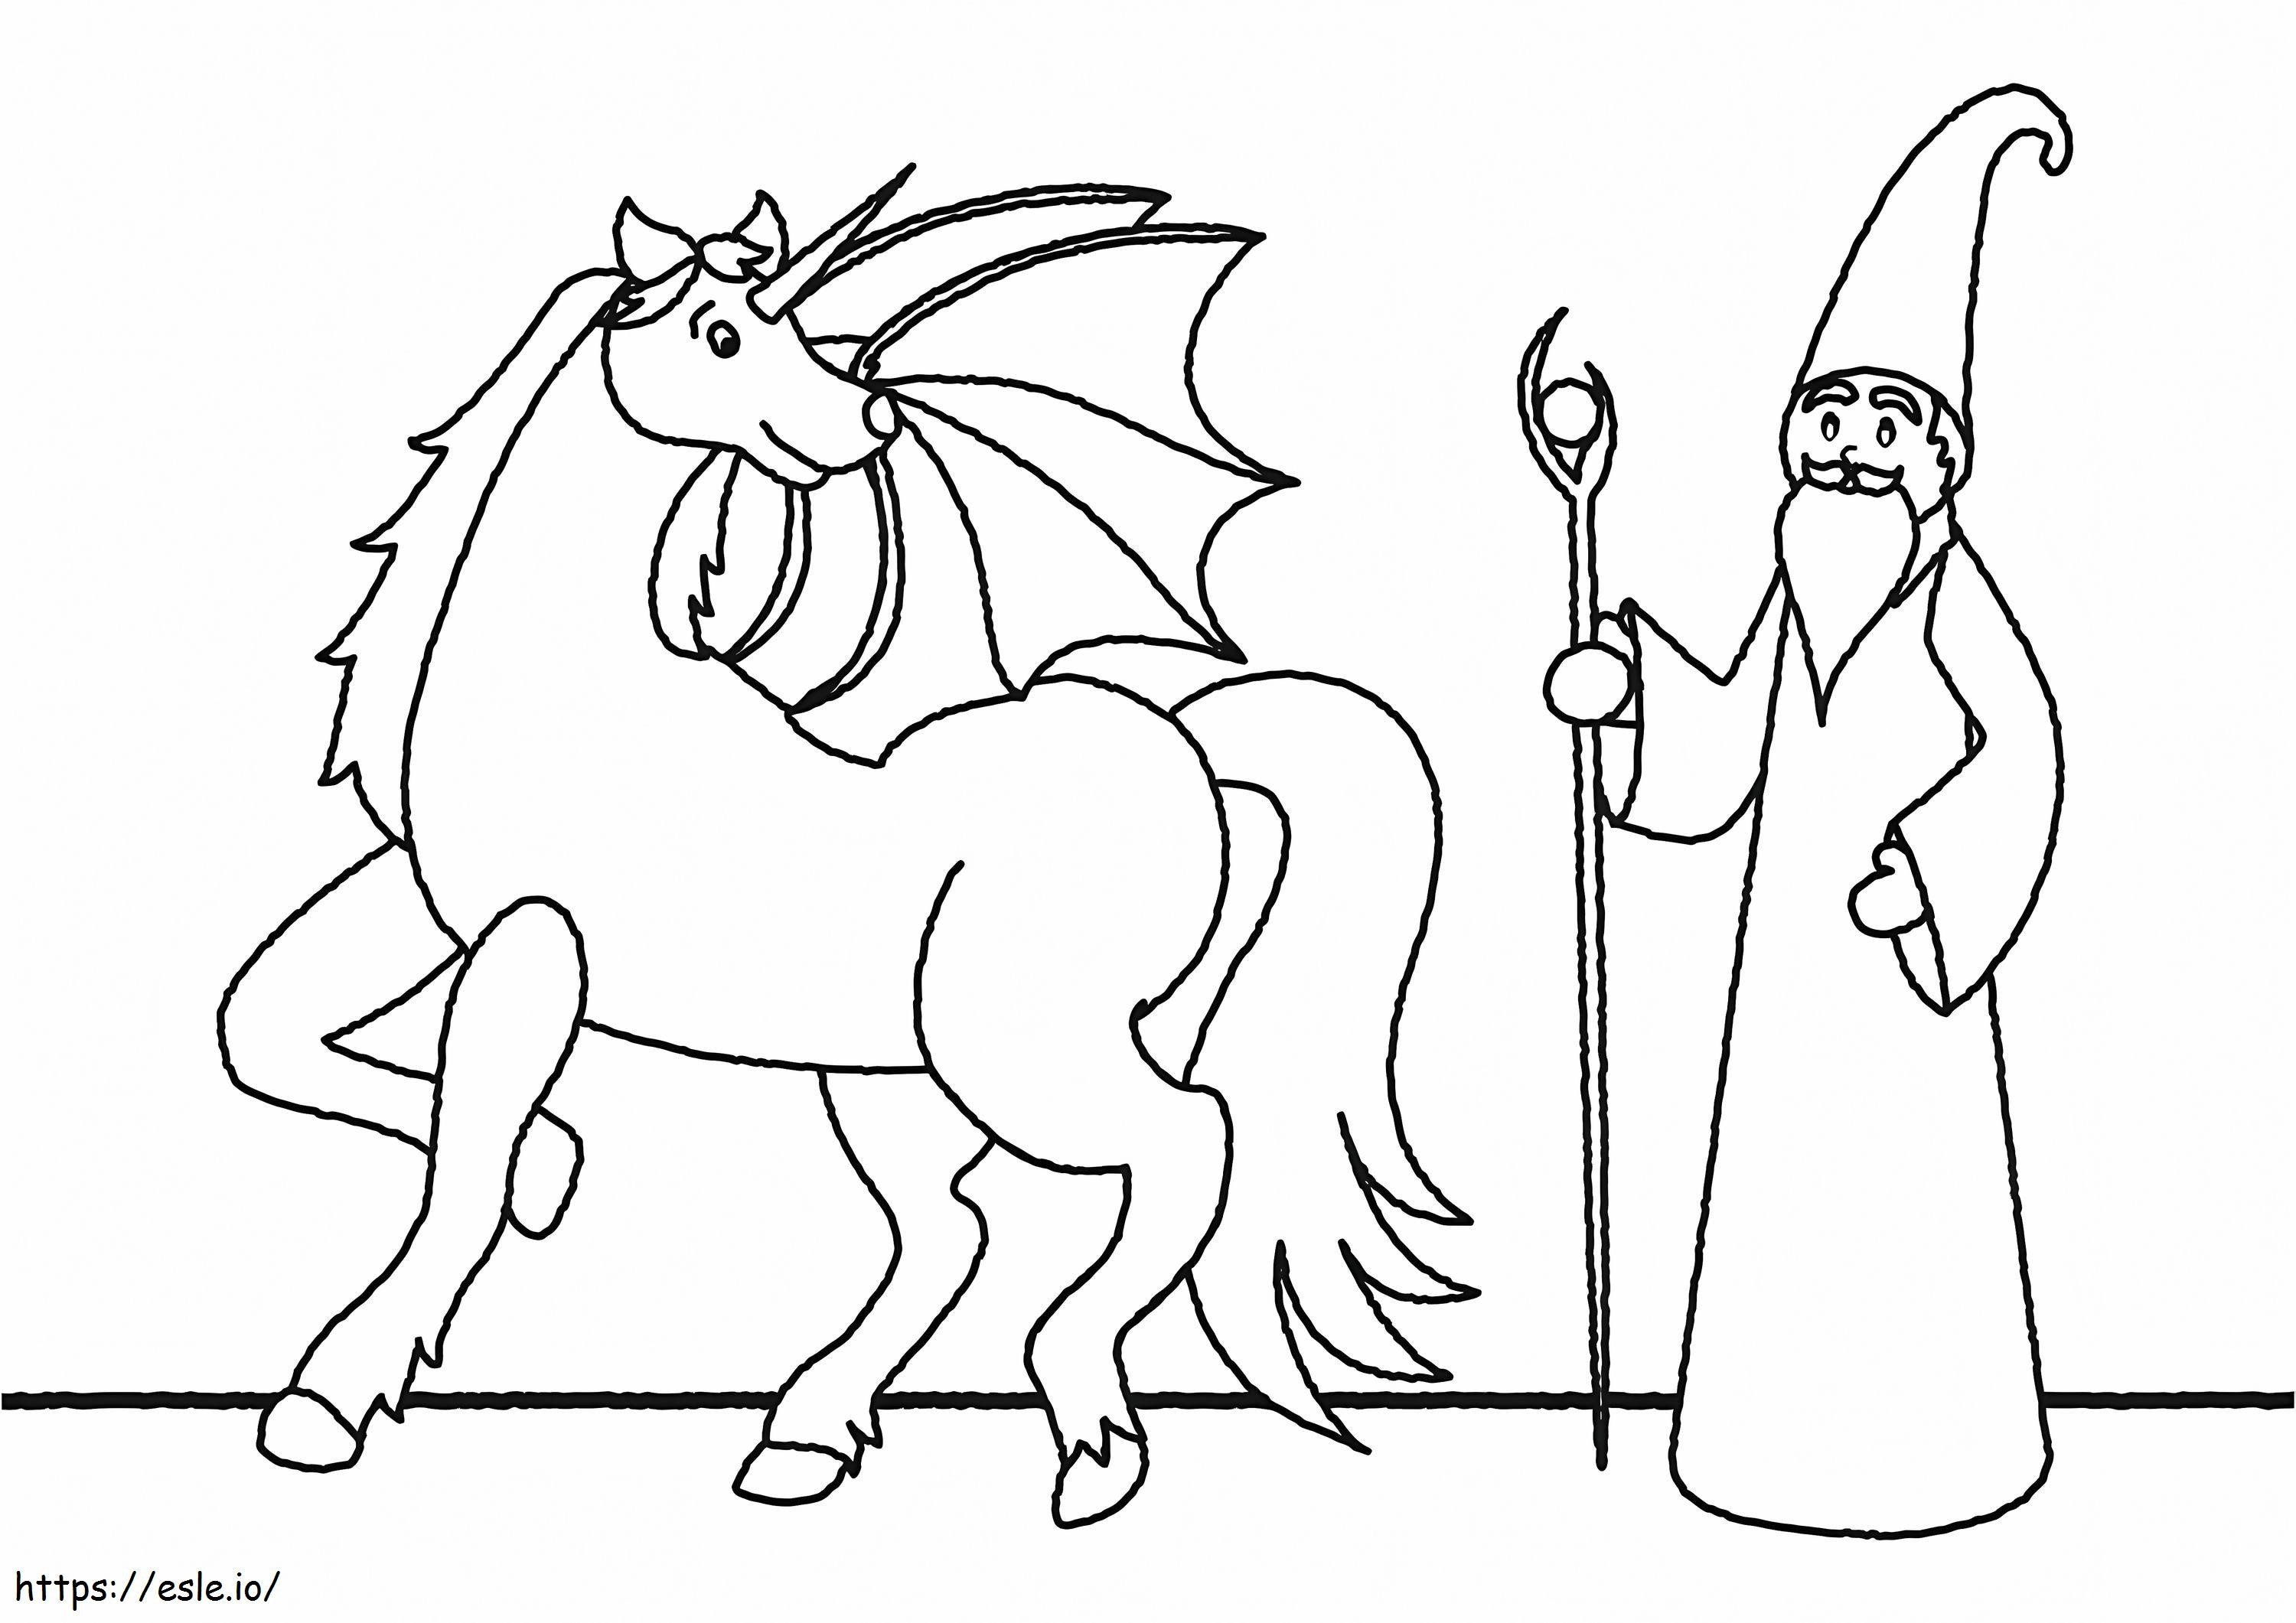 1563756699 Unicorn And Witch A4 E1600150028544 coloring page